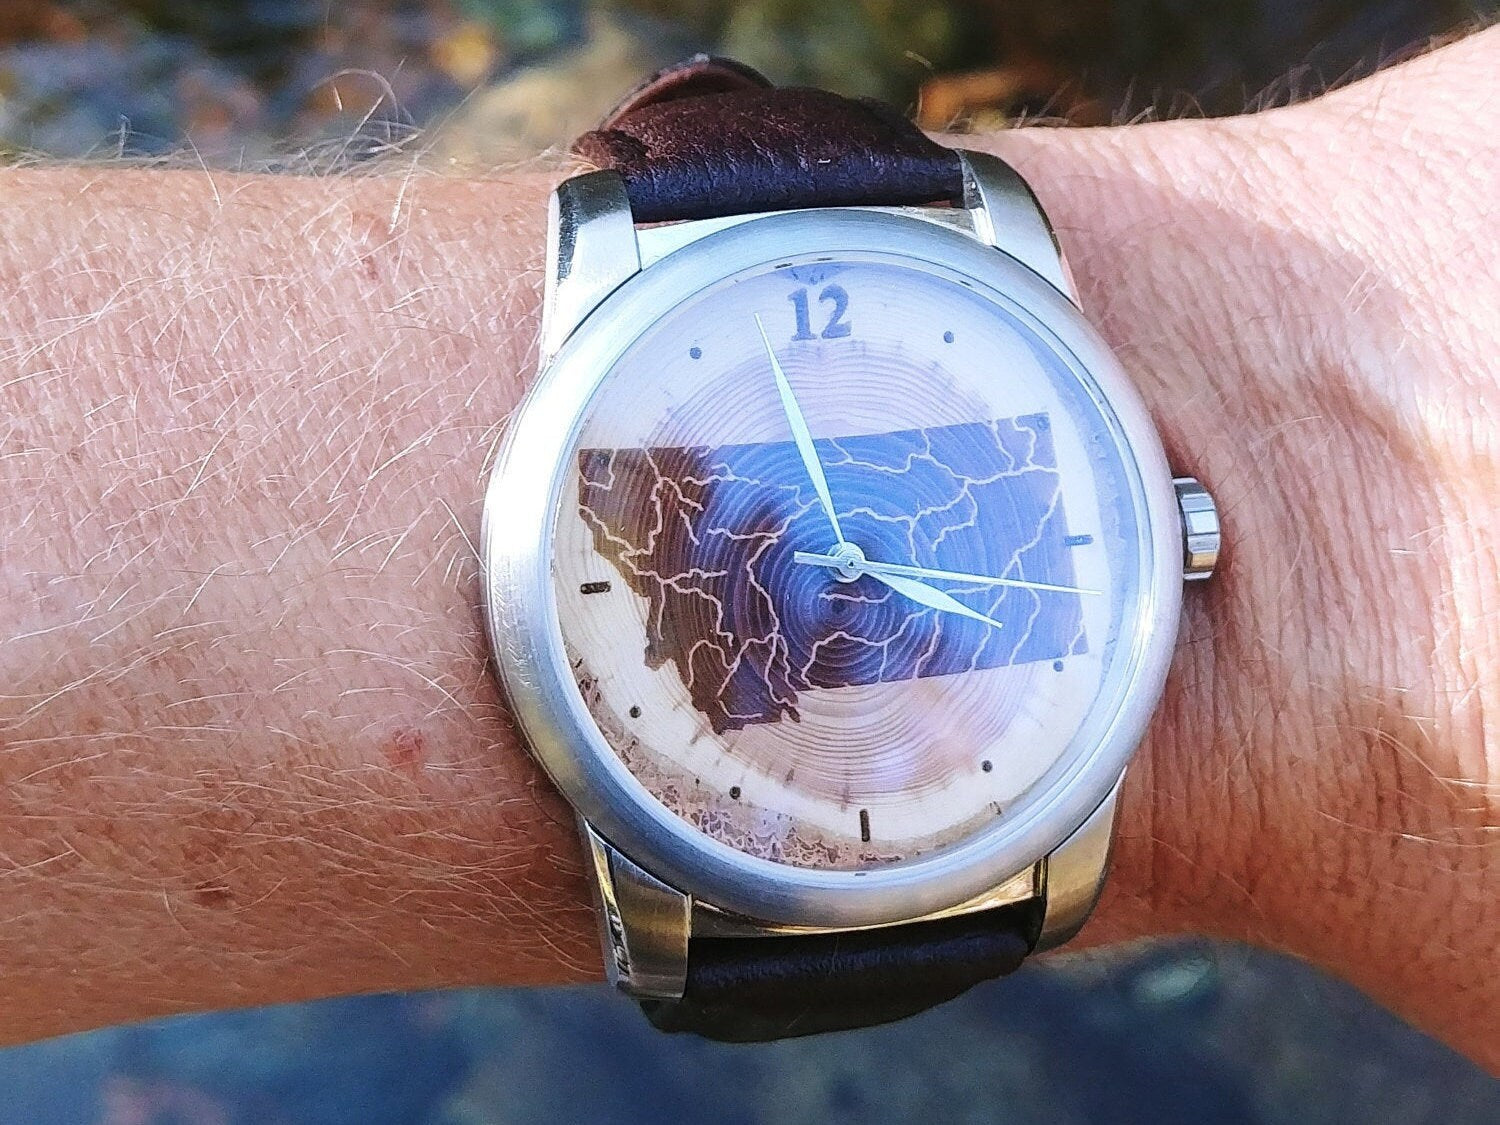 Rivers Through Time Wood Gift Watch, Watch Collector, Anniversary Gift, Gift for Son, Husband, Father.